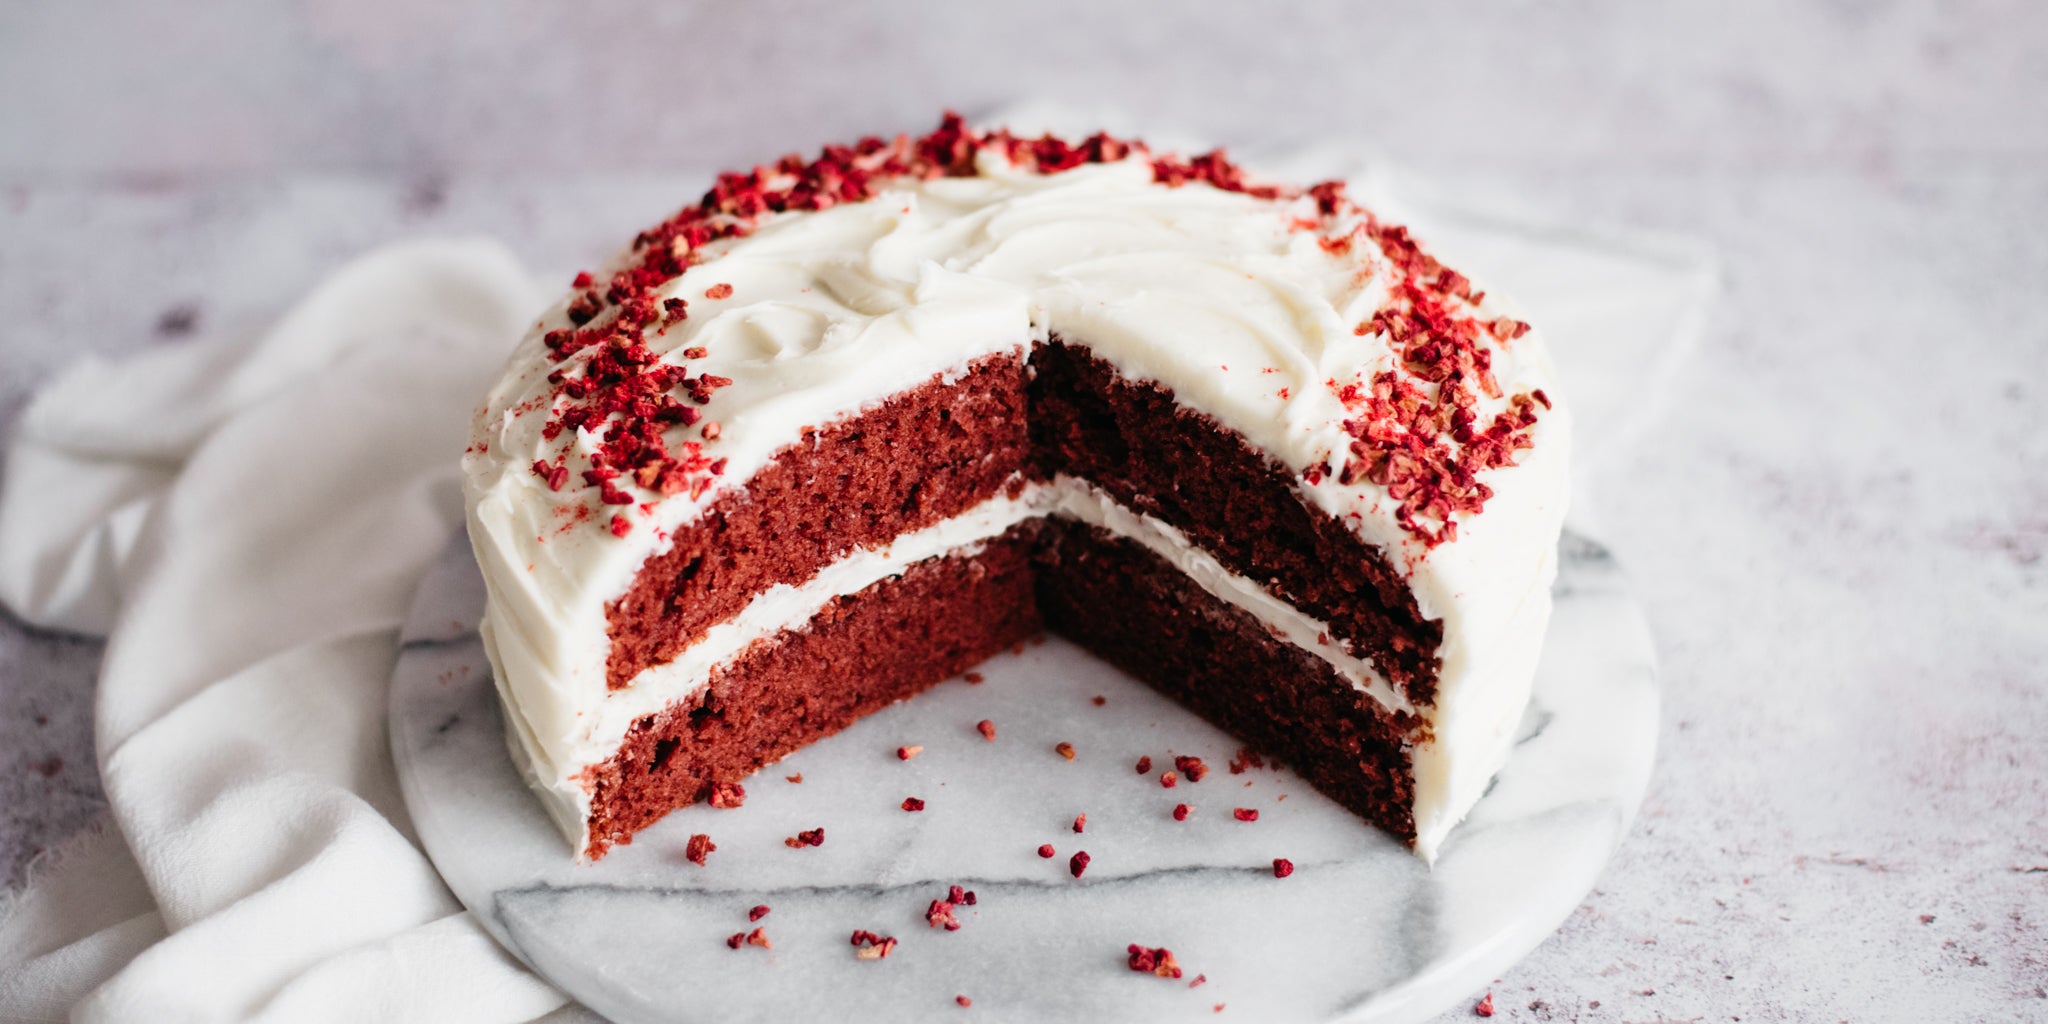 Red Velvet Cake with slices cut out of it, showing the rich, red insides and Red Velvet Cake crumbs on the cake board